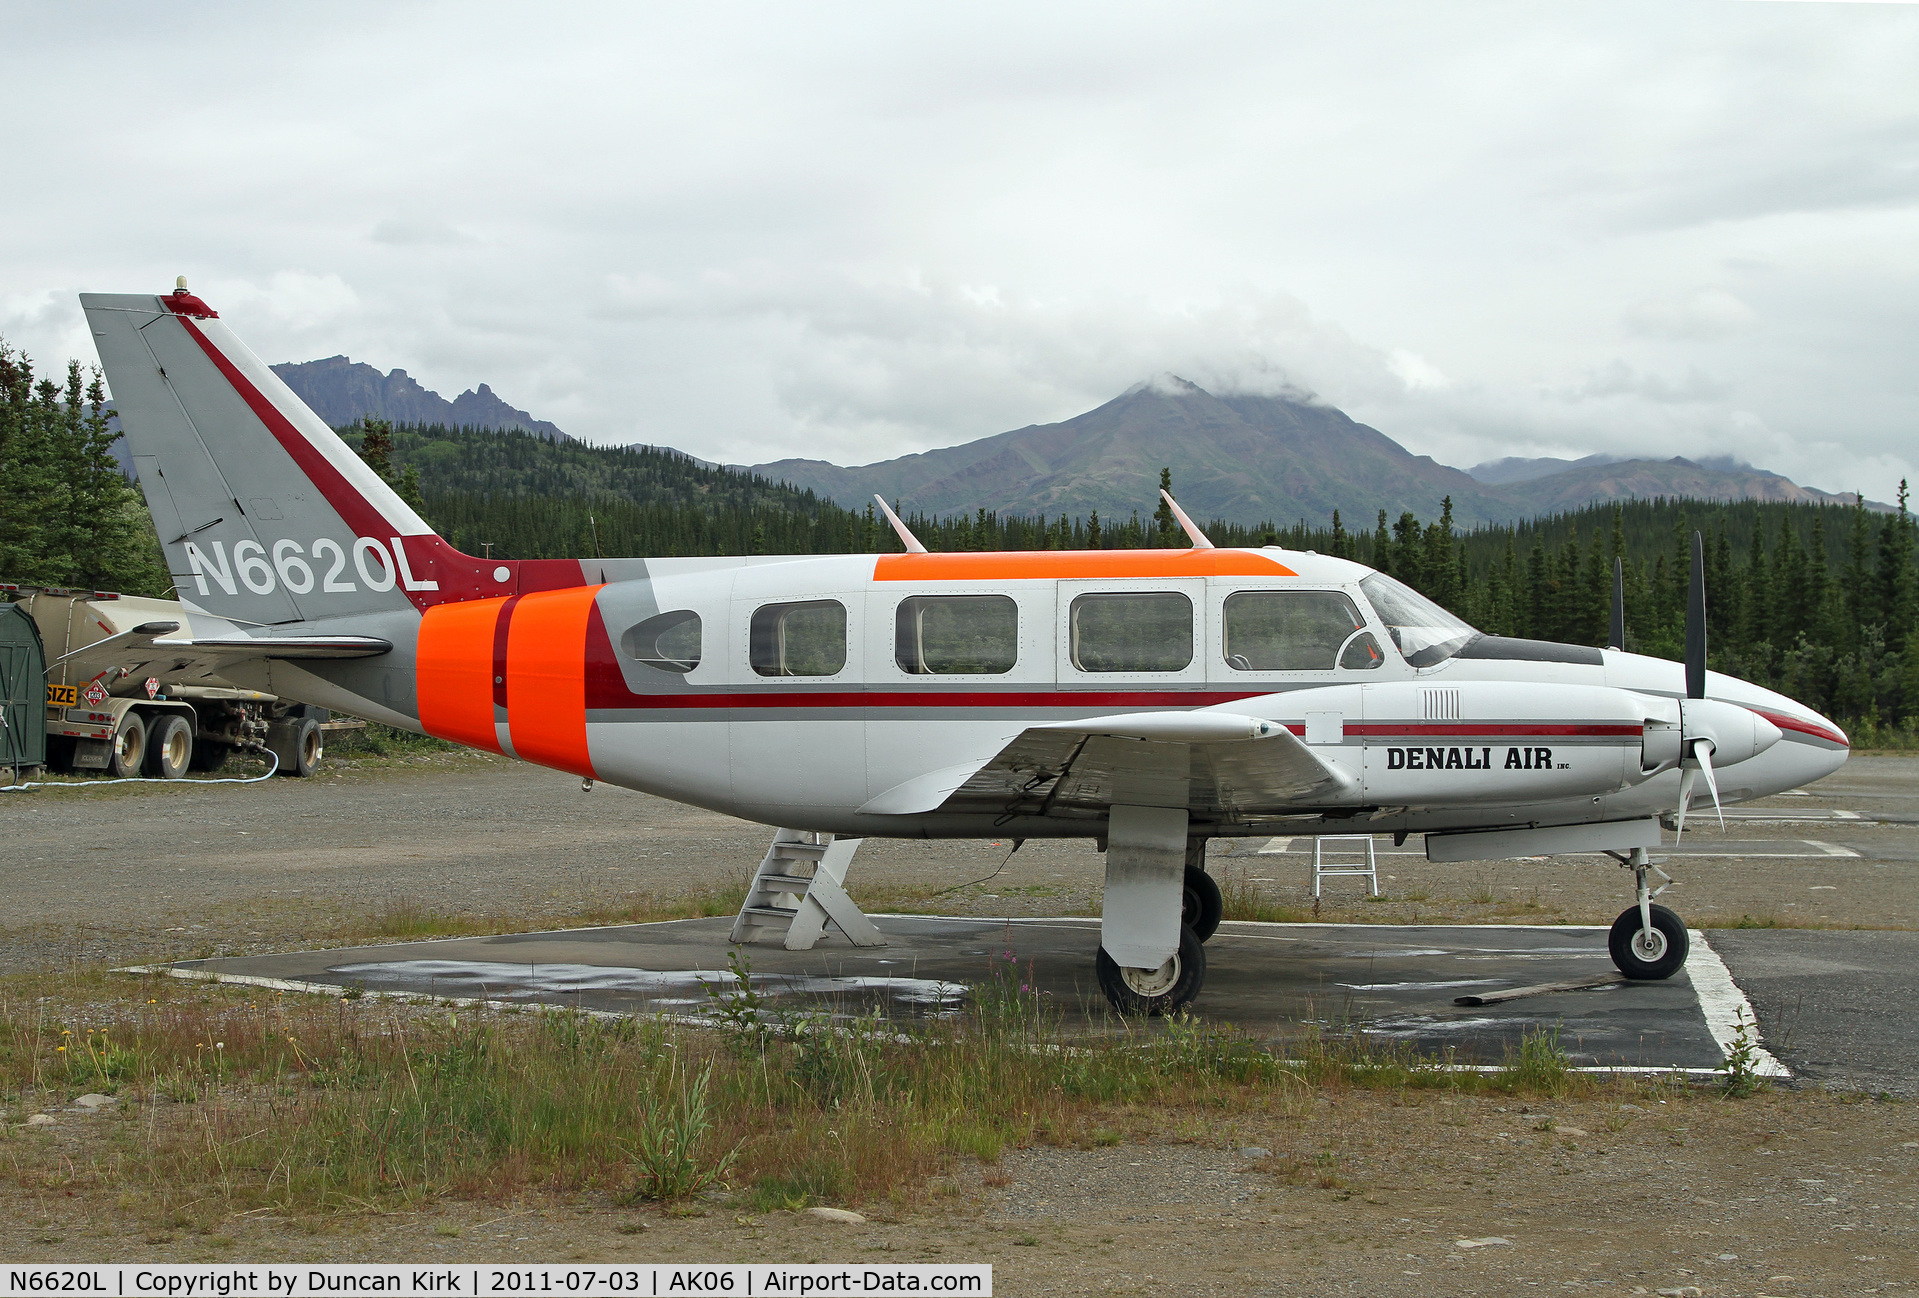 N6620L, 1969 Piper PA-31-310 Navajo C/N 31-554, Tourism flights to see Mt McKinley were cancelled on this day